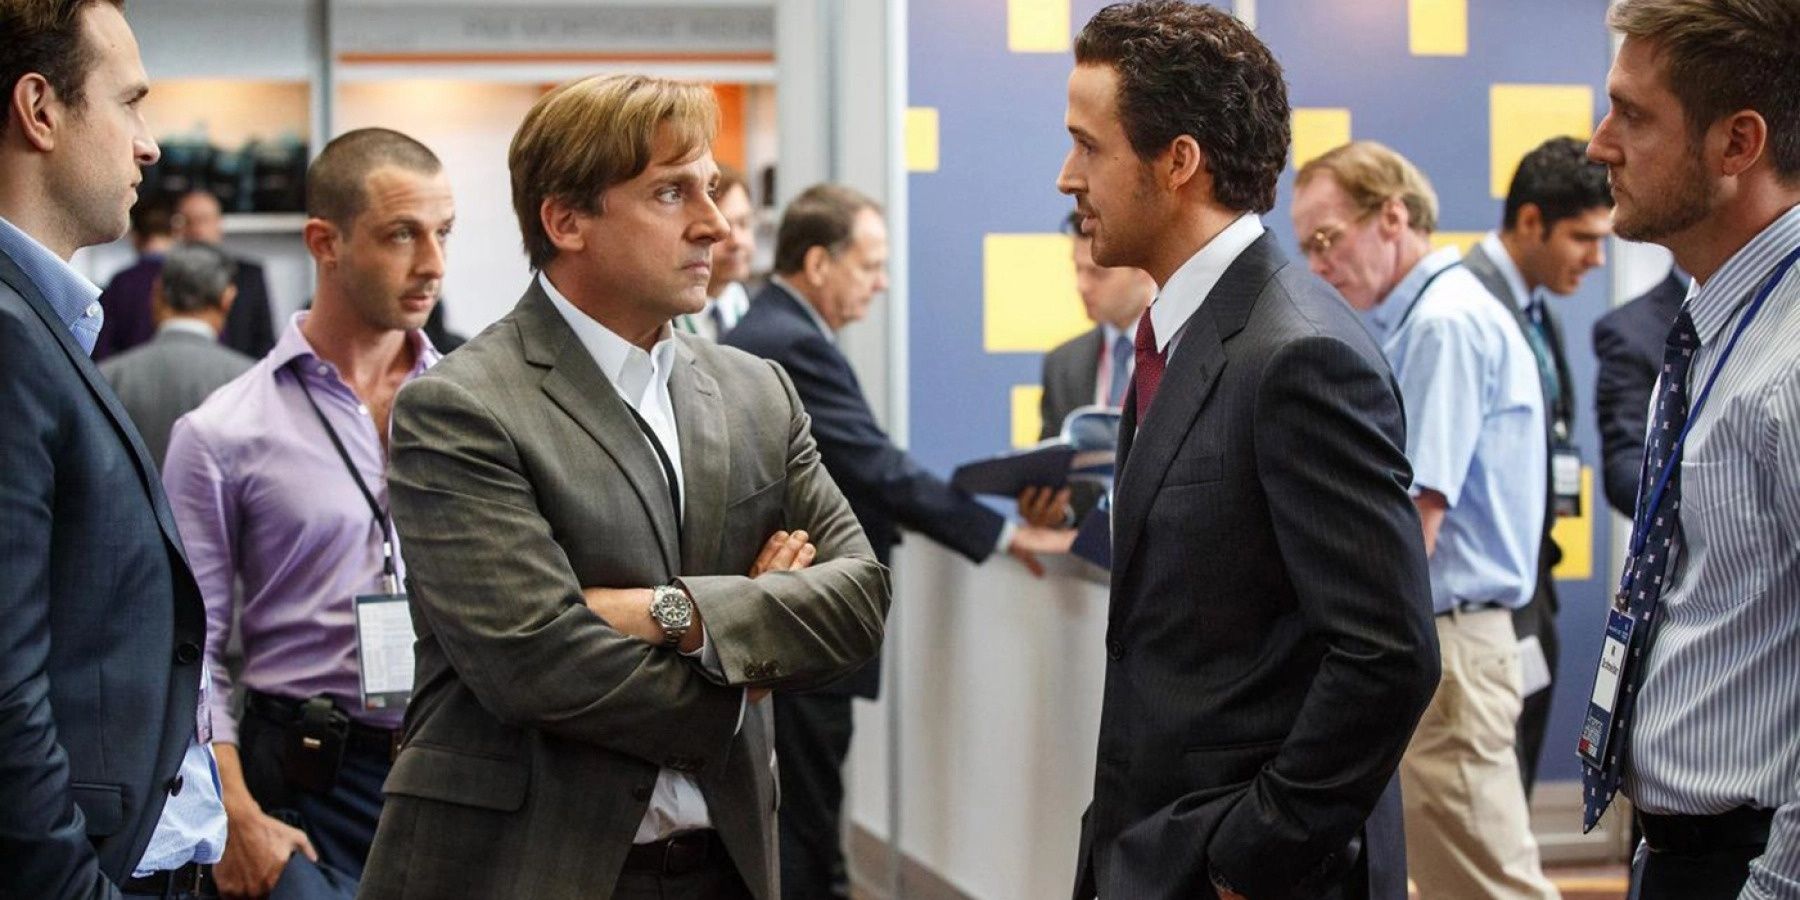 Mark Baum and Jared Vannett squaring off in office in The Big Short